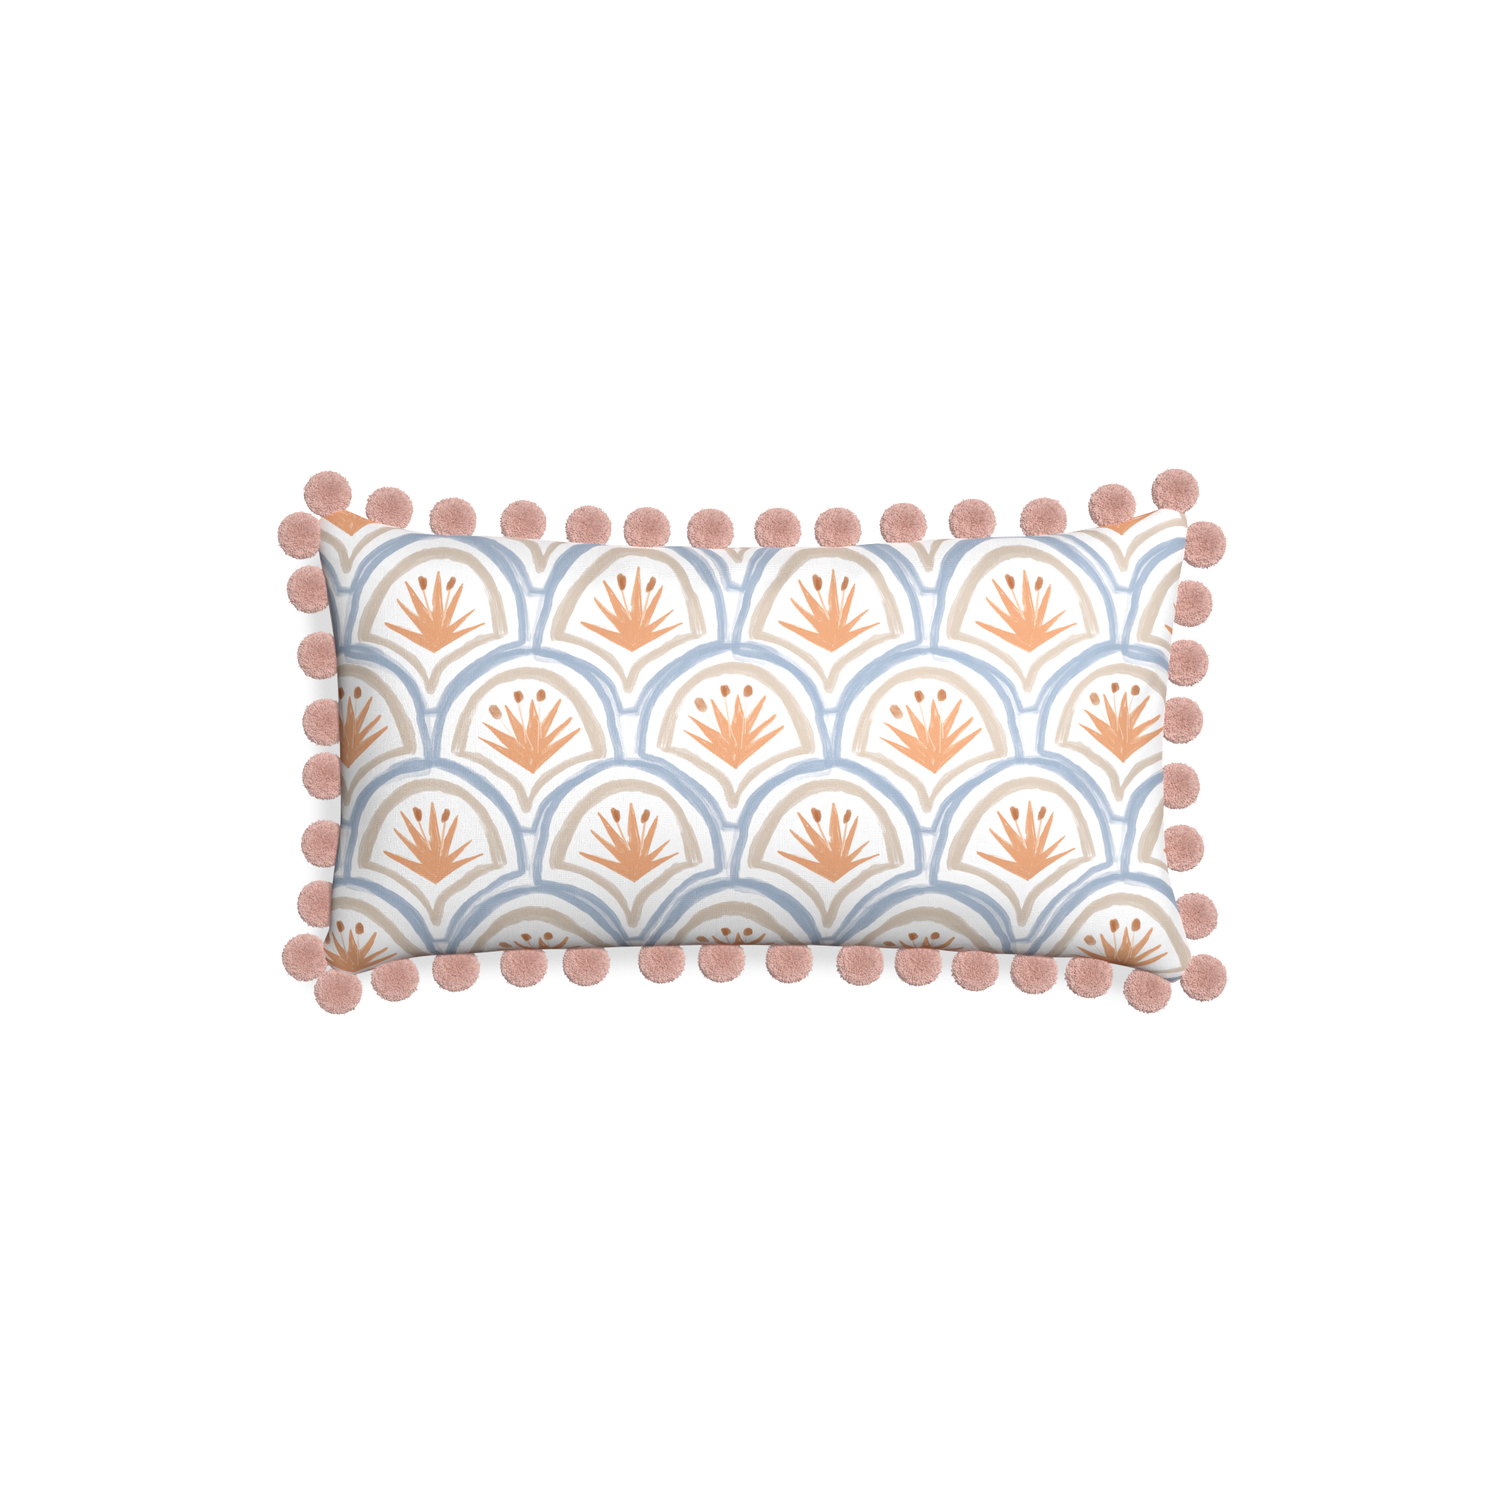 Petite-lumbar thatcher apricot custom art deco palm patternpillow with rose pom pom on white background